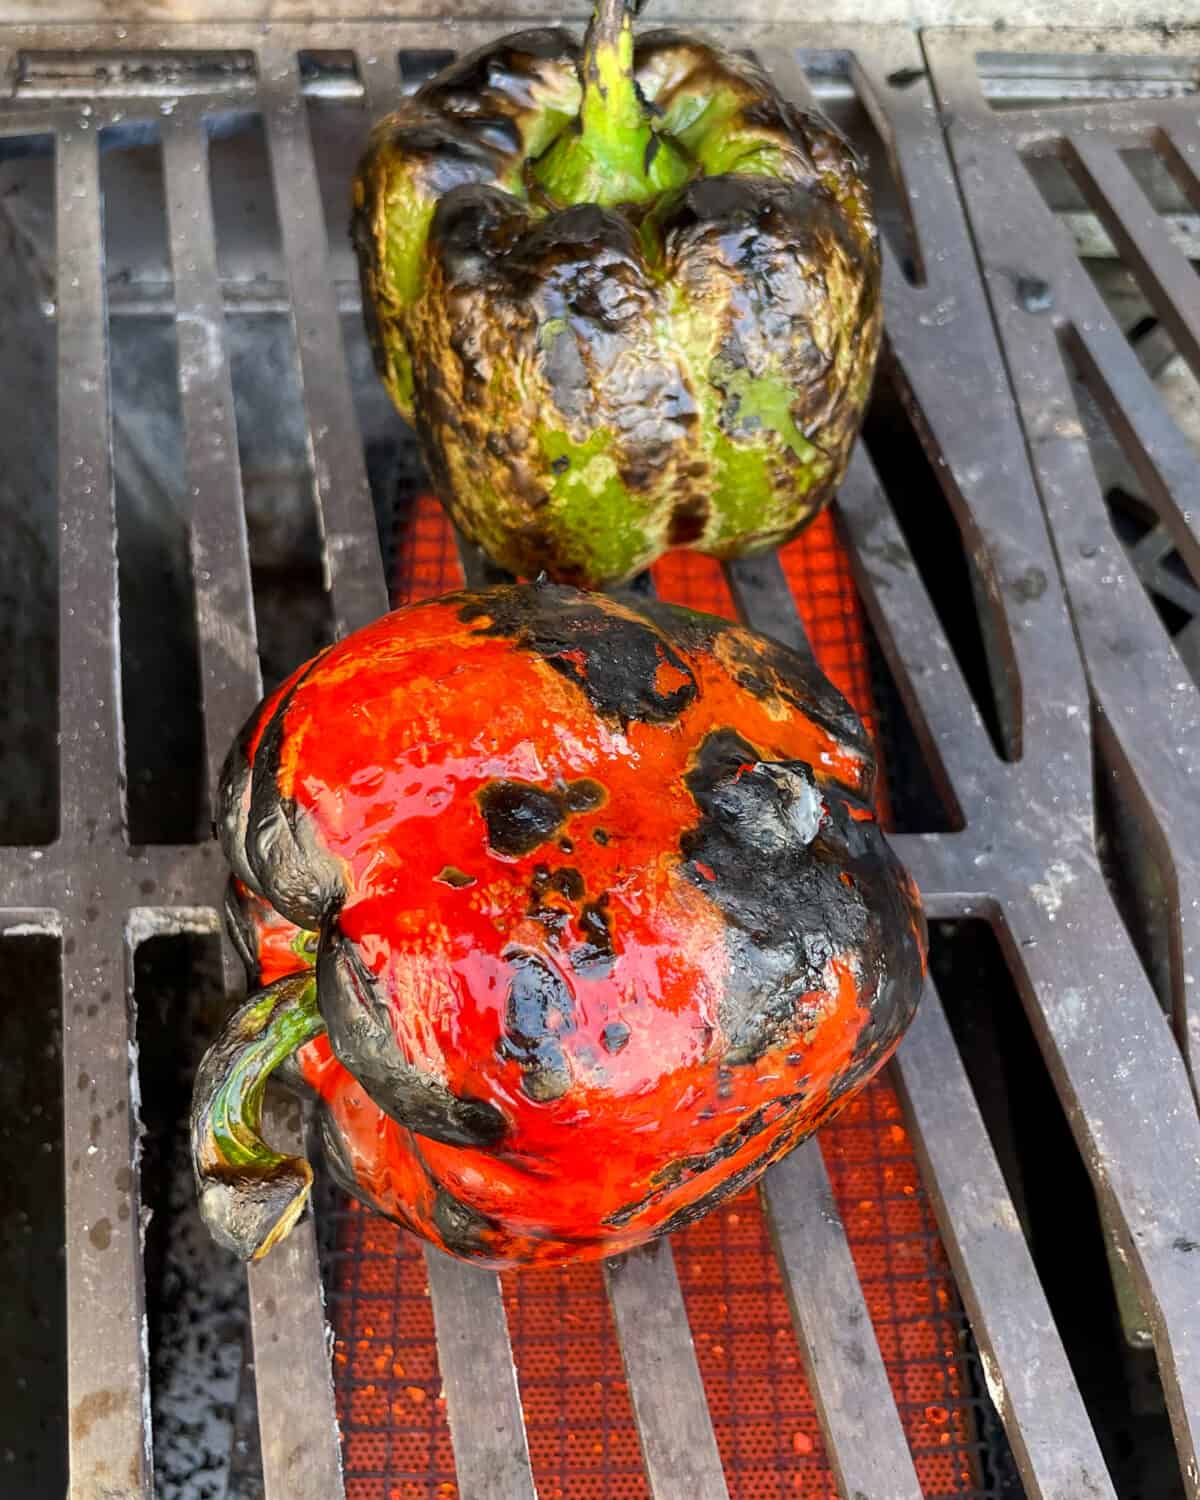 A blistered red and green pepper on the grill.